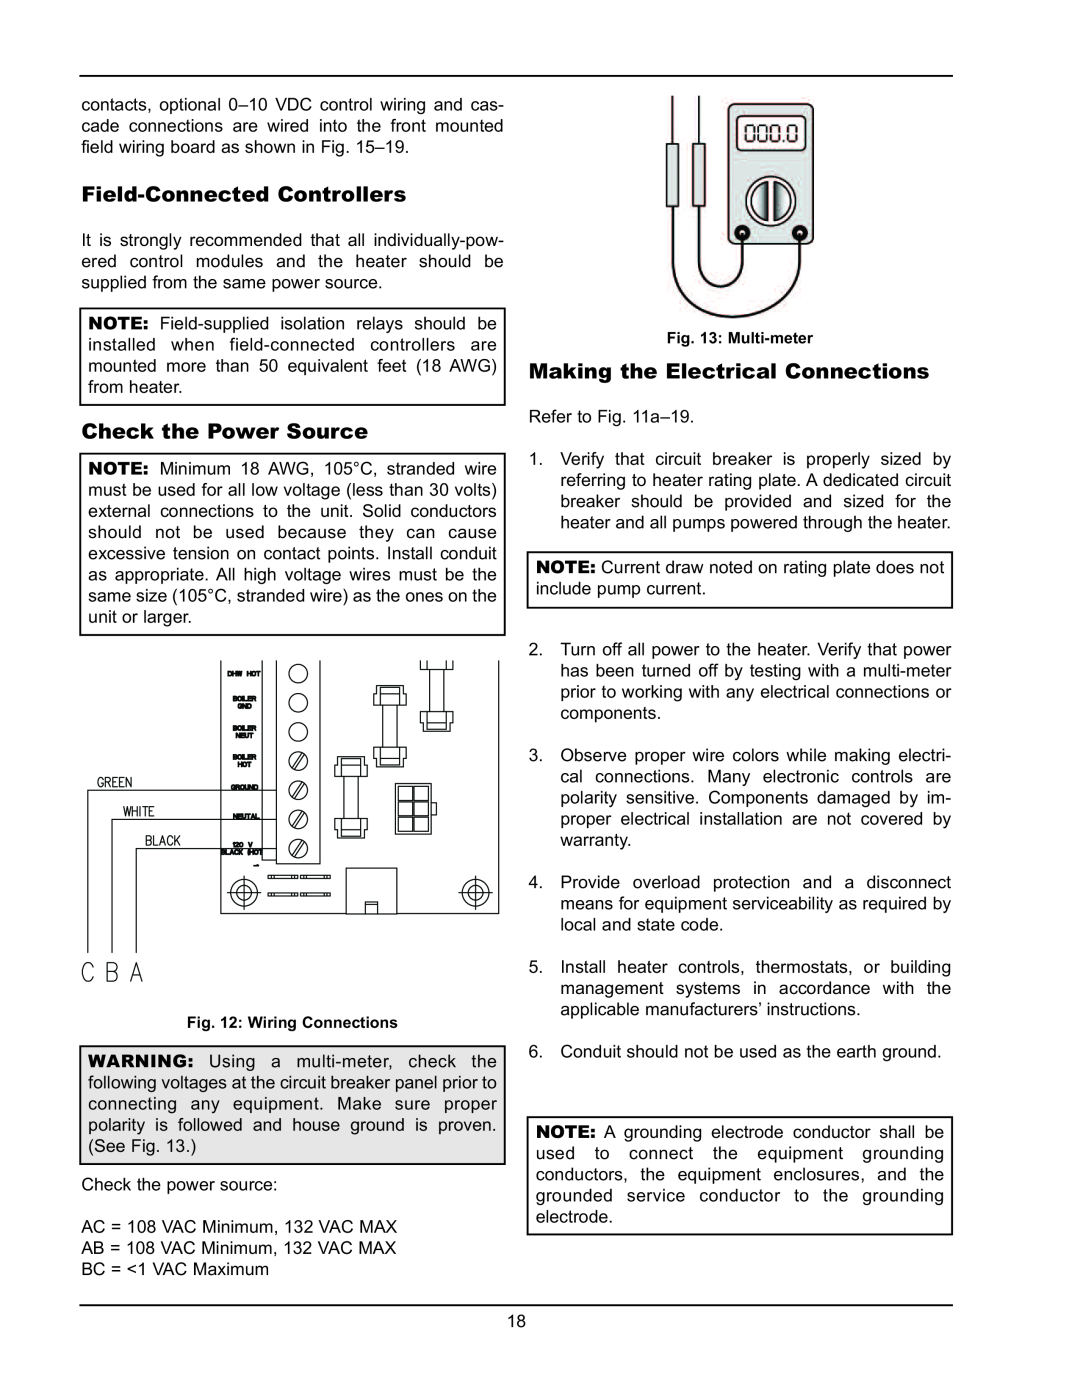 Raypak 850, 300 operating instructions Field-ConnectedControllers, Check the Power Source, Making the Electrical Connections 